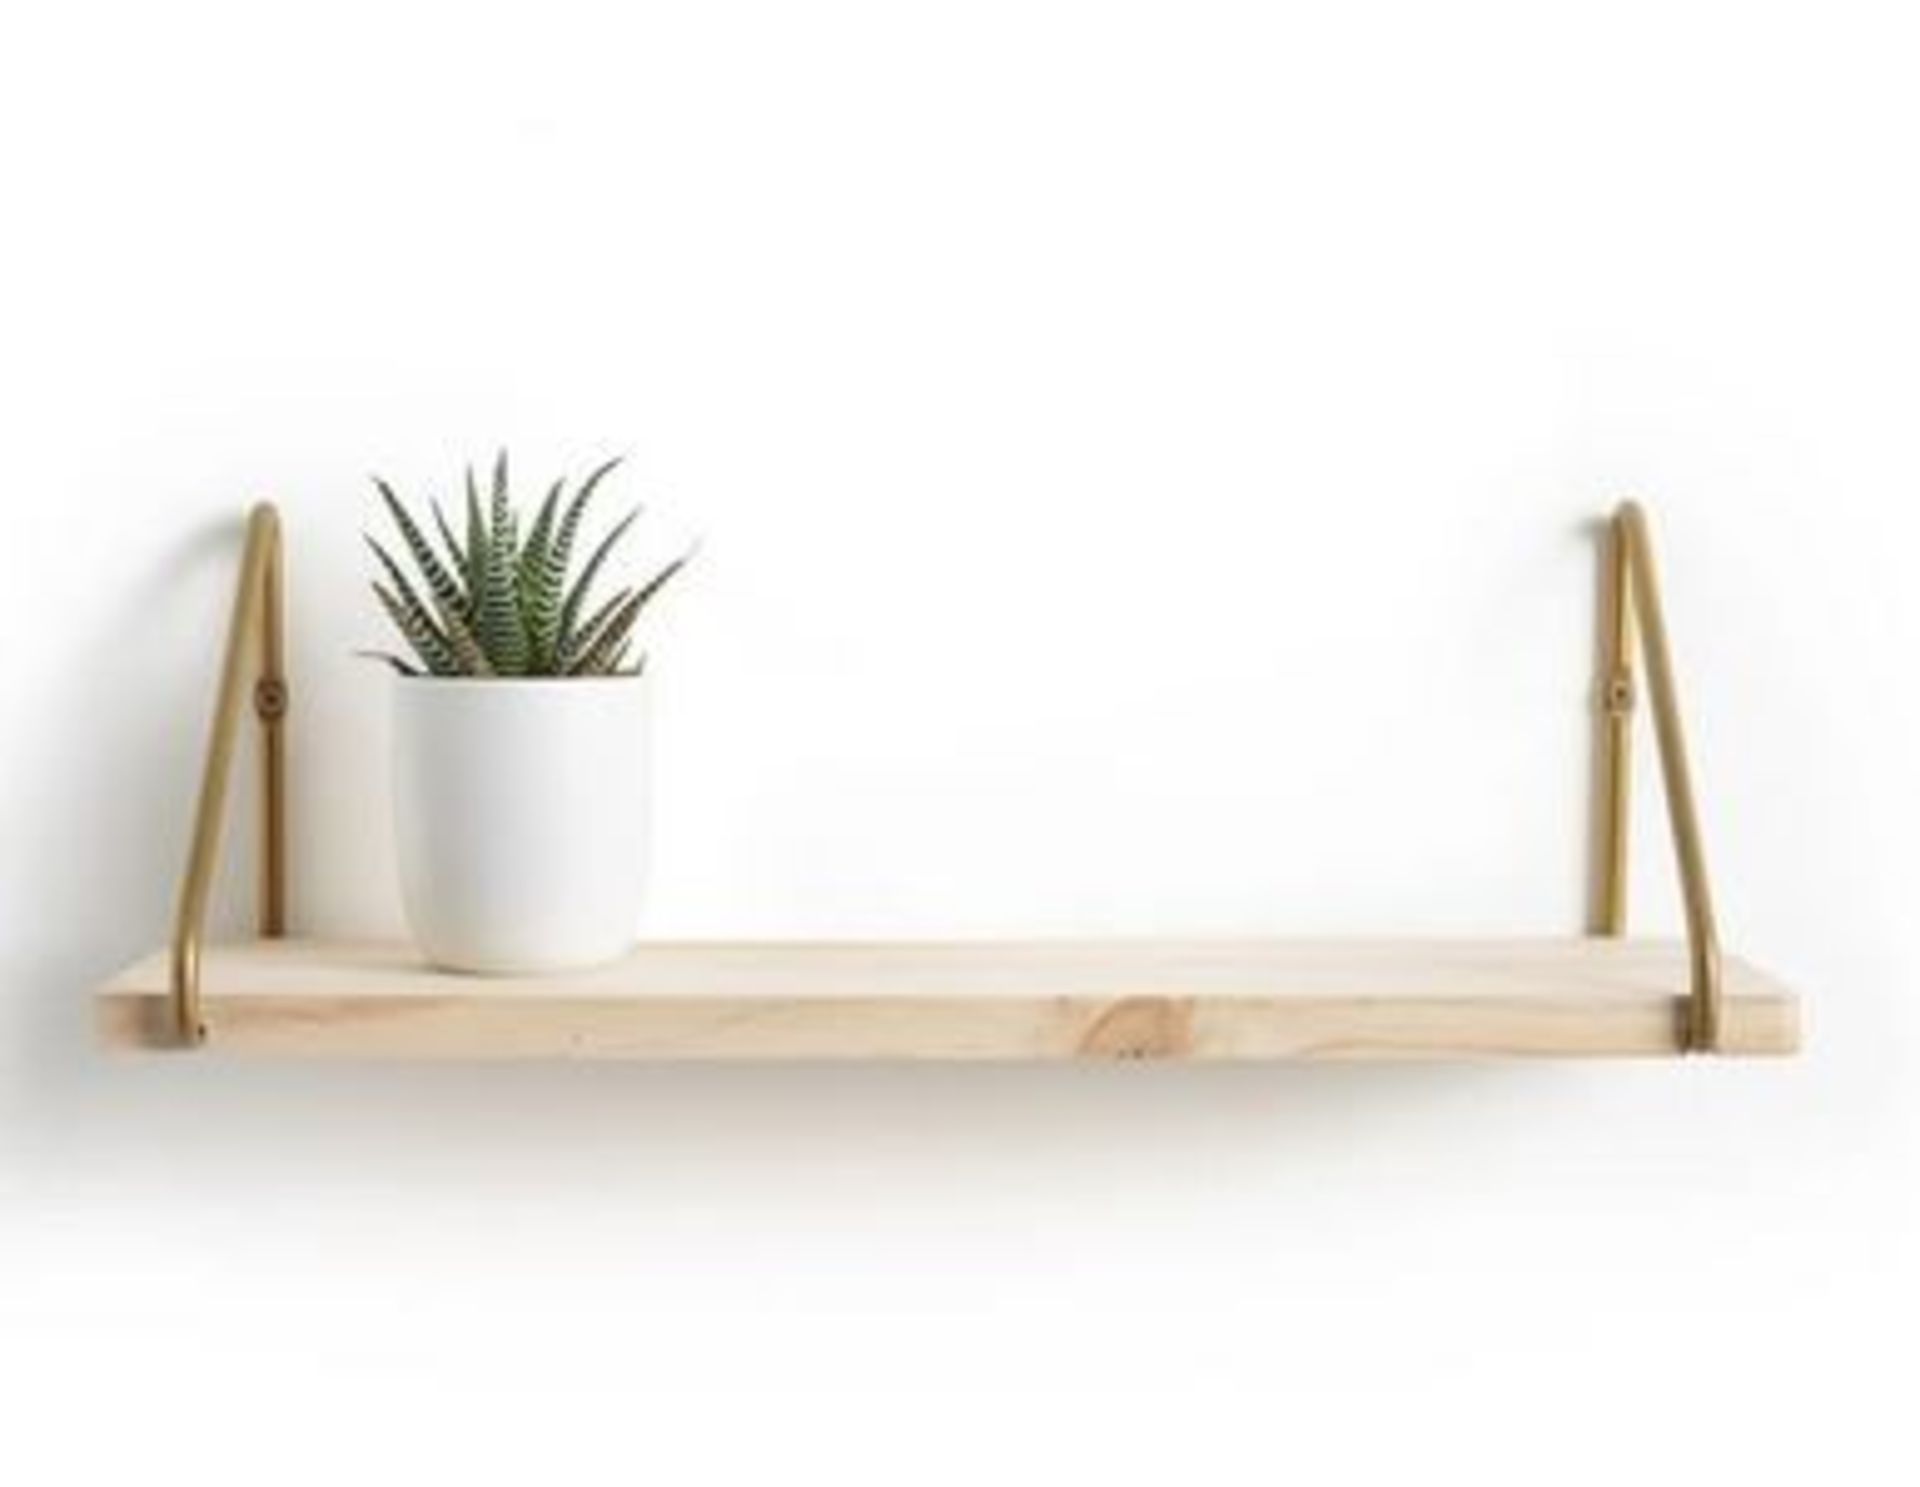 1 X LA REDOUTE VINTO PINE AND METAL WALL SHELF IN NATURAL AND BRASS 50CM / RRP £26.00 / GRADE A,